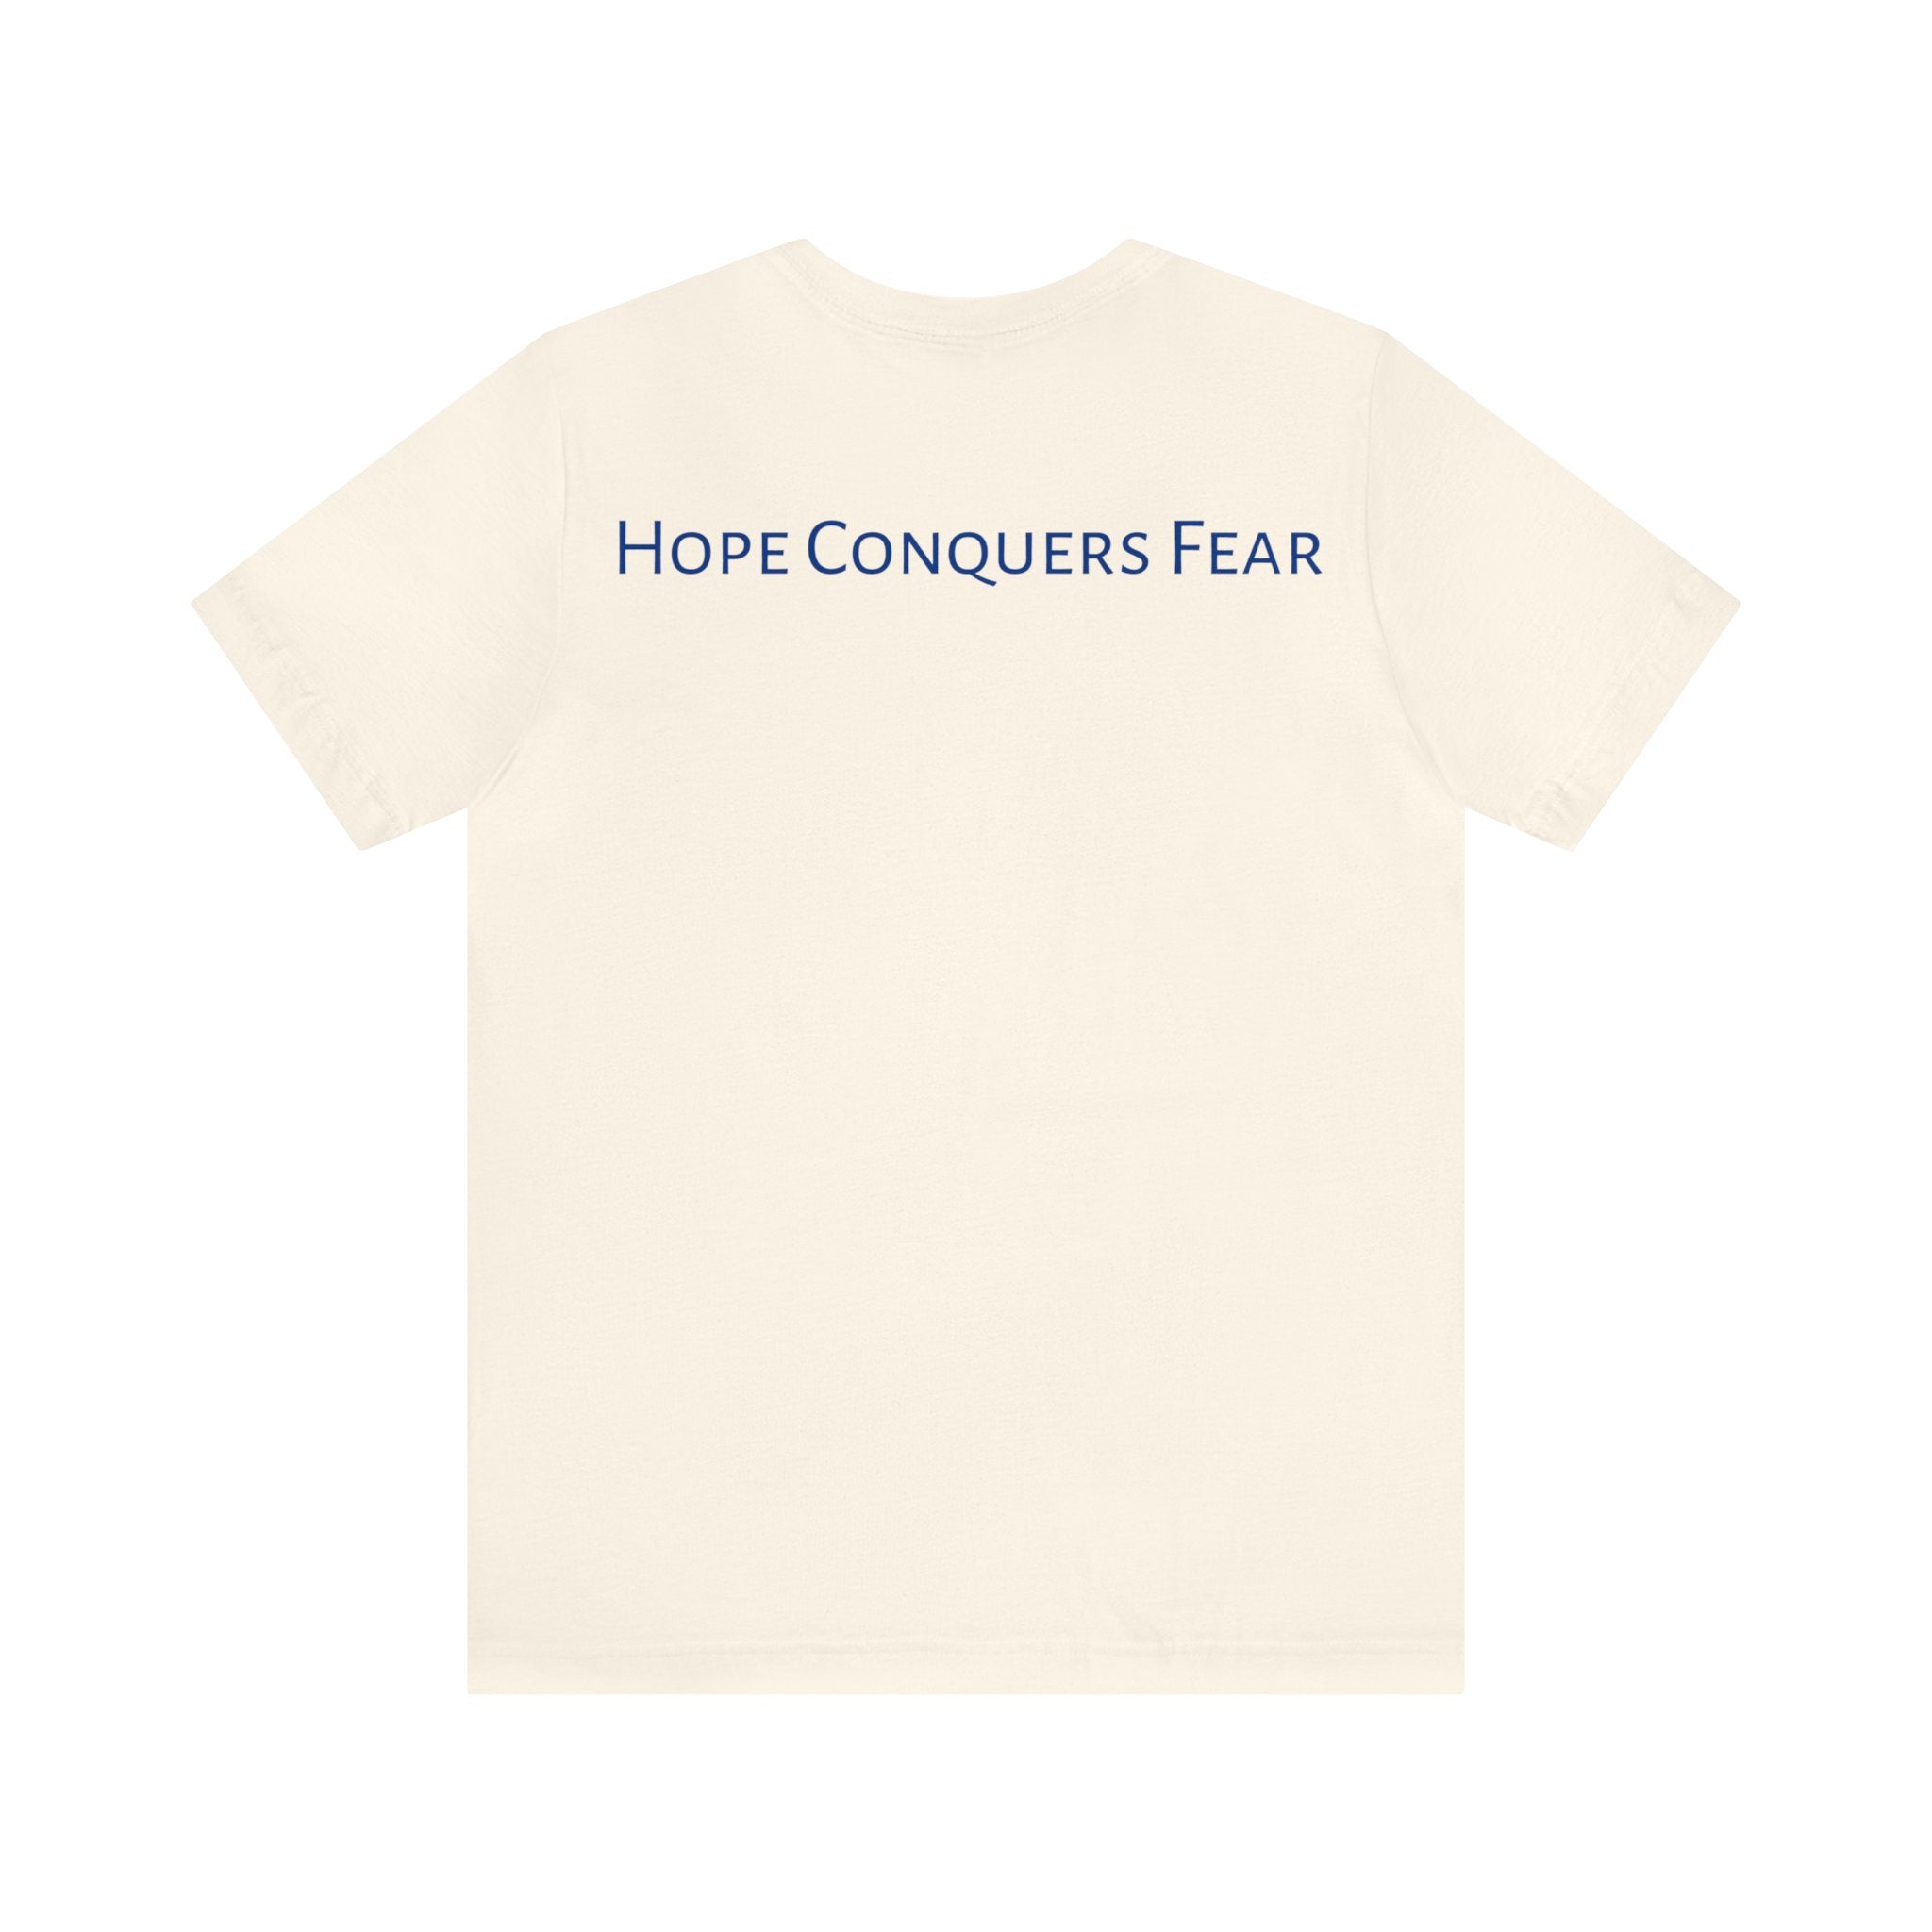 Hope Conquers Fear Jersey Tee - Bella+Canvas 3001 Heather Ice Blue Airlume Cotton Bella+Canvas 3001 Crew Neckline Jersey Short Sleeve Lightweight Fabric Mental Health Support Retail Fit Tear-away Label Tee Unisex Tee T-Shirt 11561566823662817771_2048 Printify